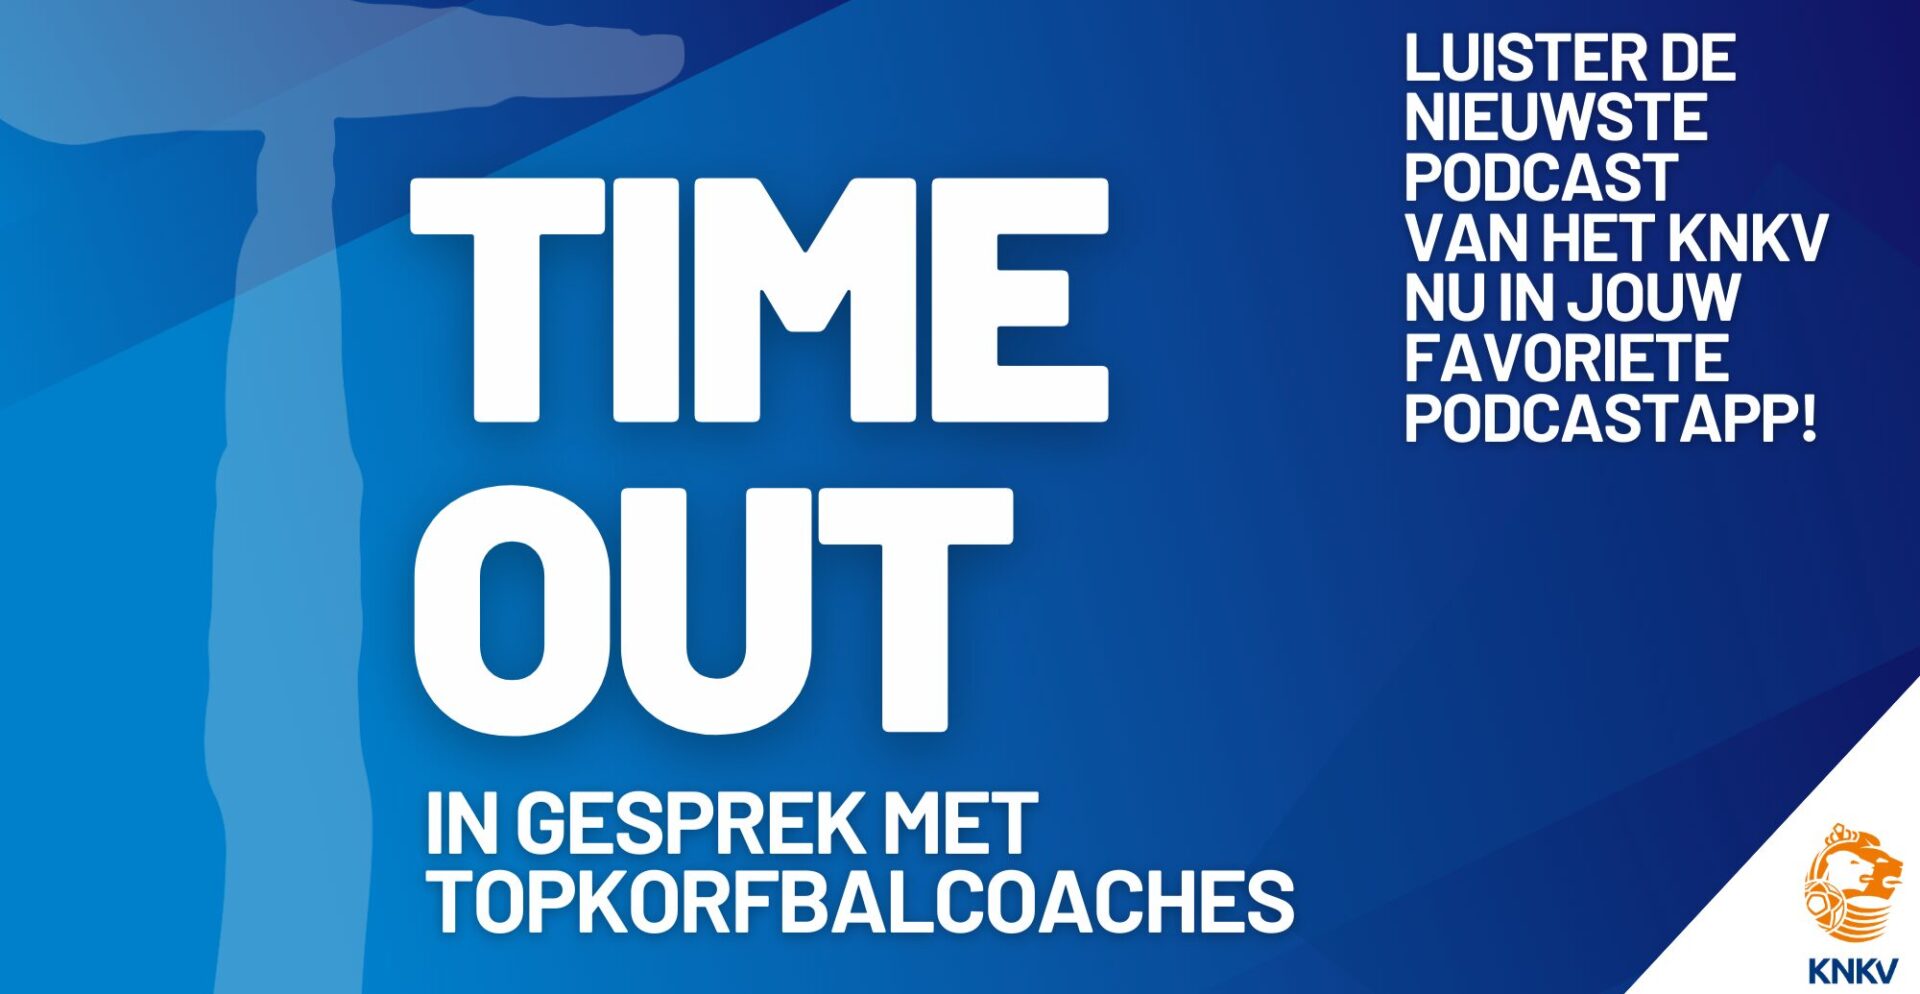 In gesprek met topcoaches: KNKV komt met podcastserie ‘Time-out’